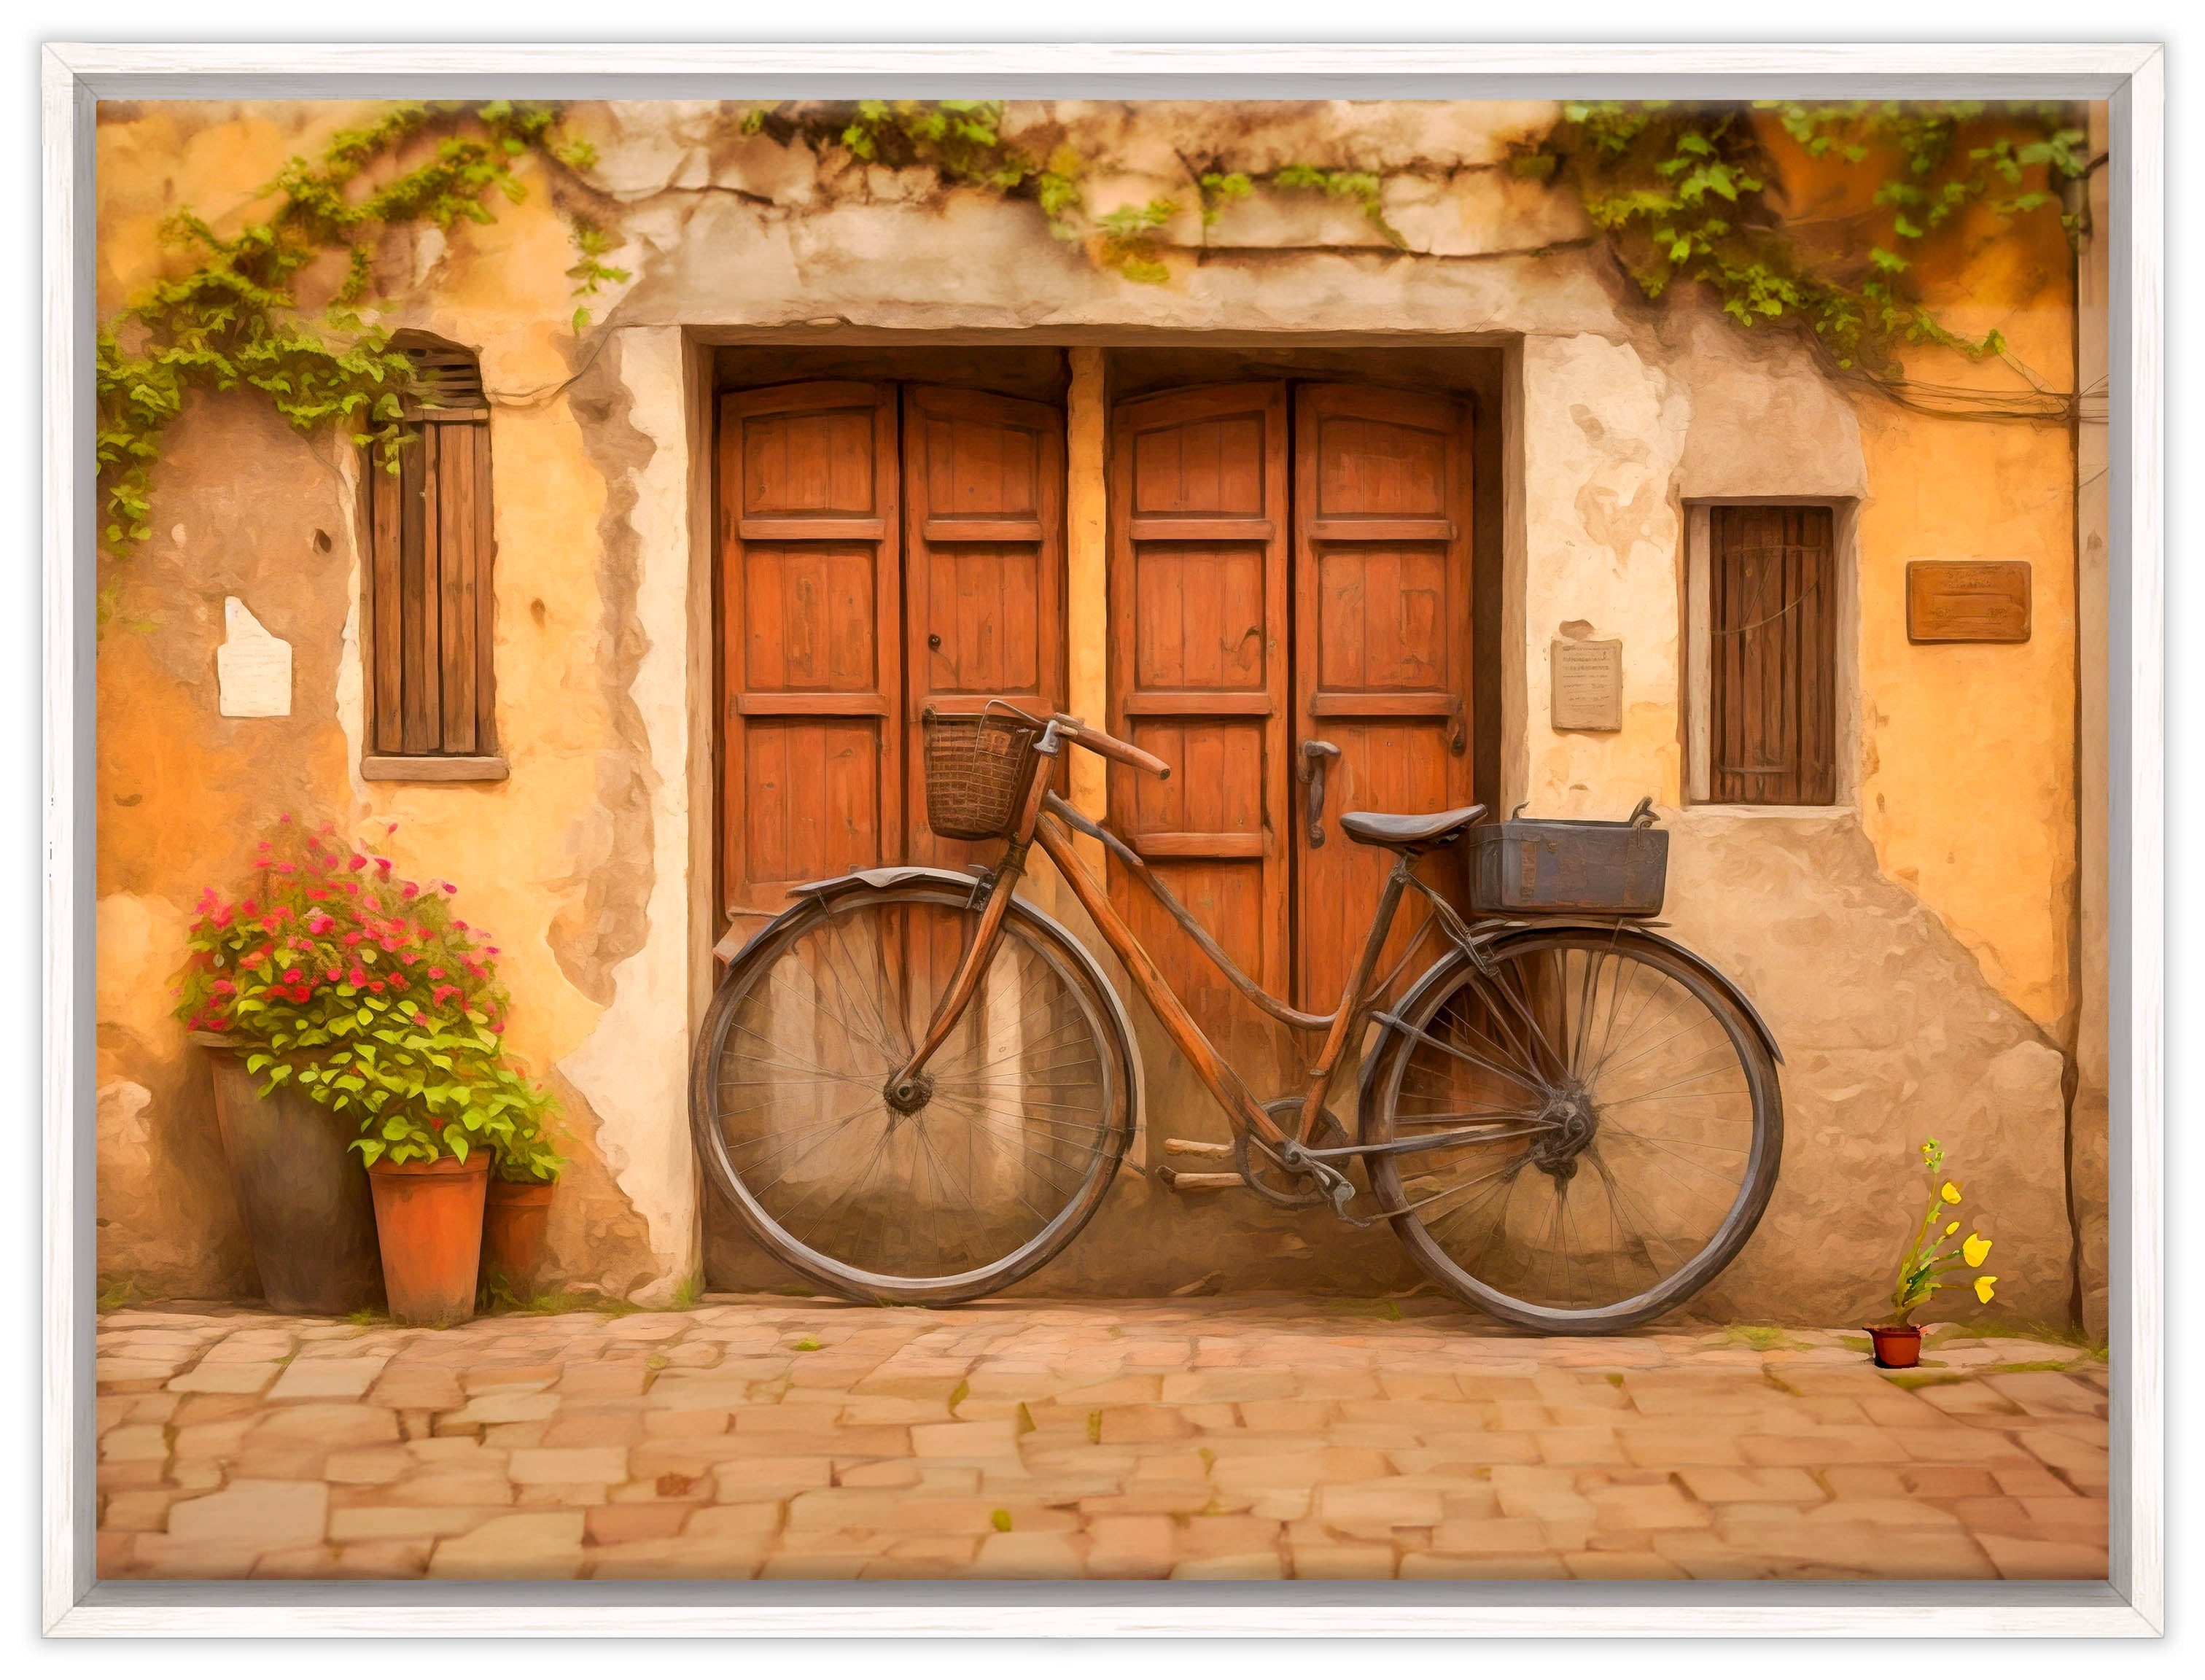 Vintage Bicycle in Italy - Painting